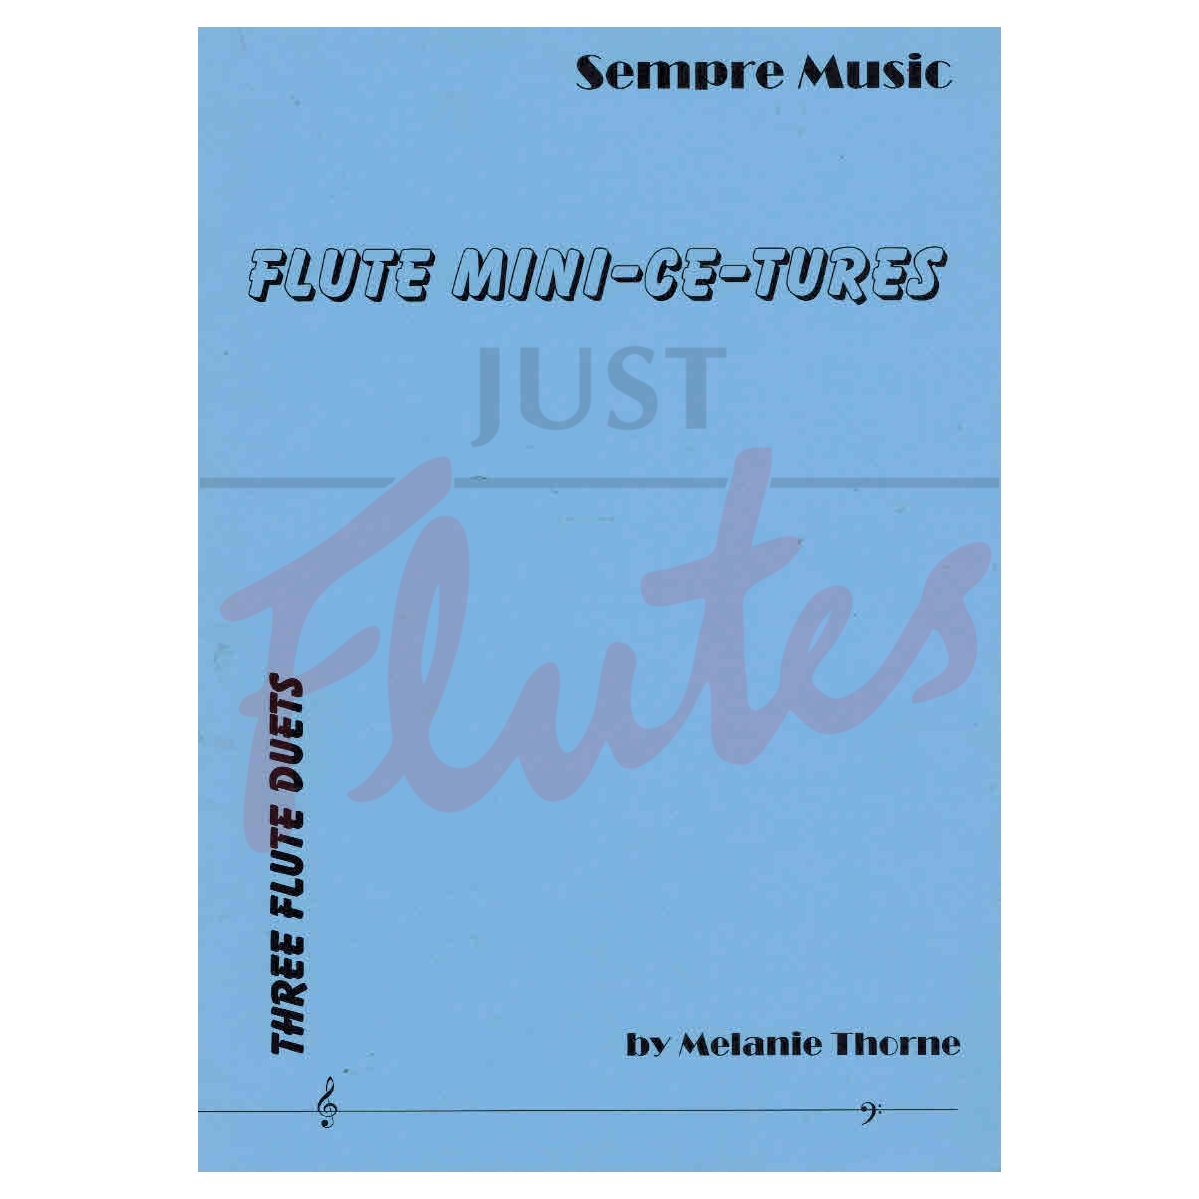 Flute Mini-ce-tures for Two Flutes